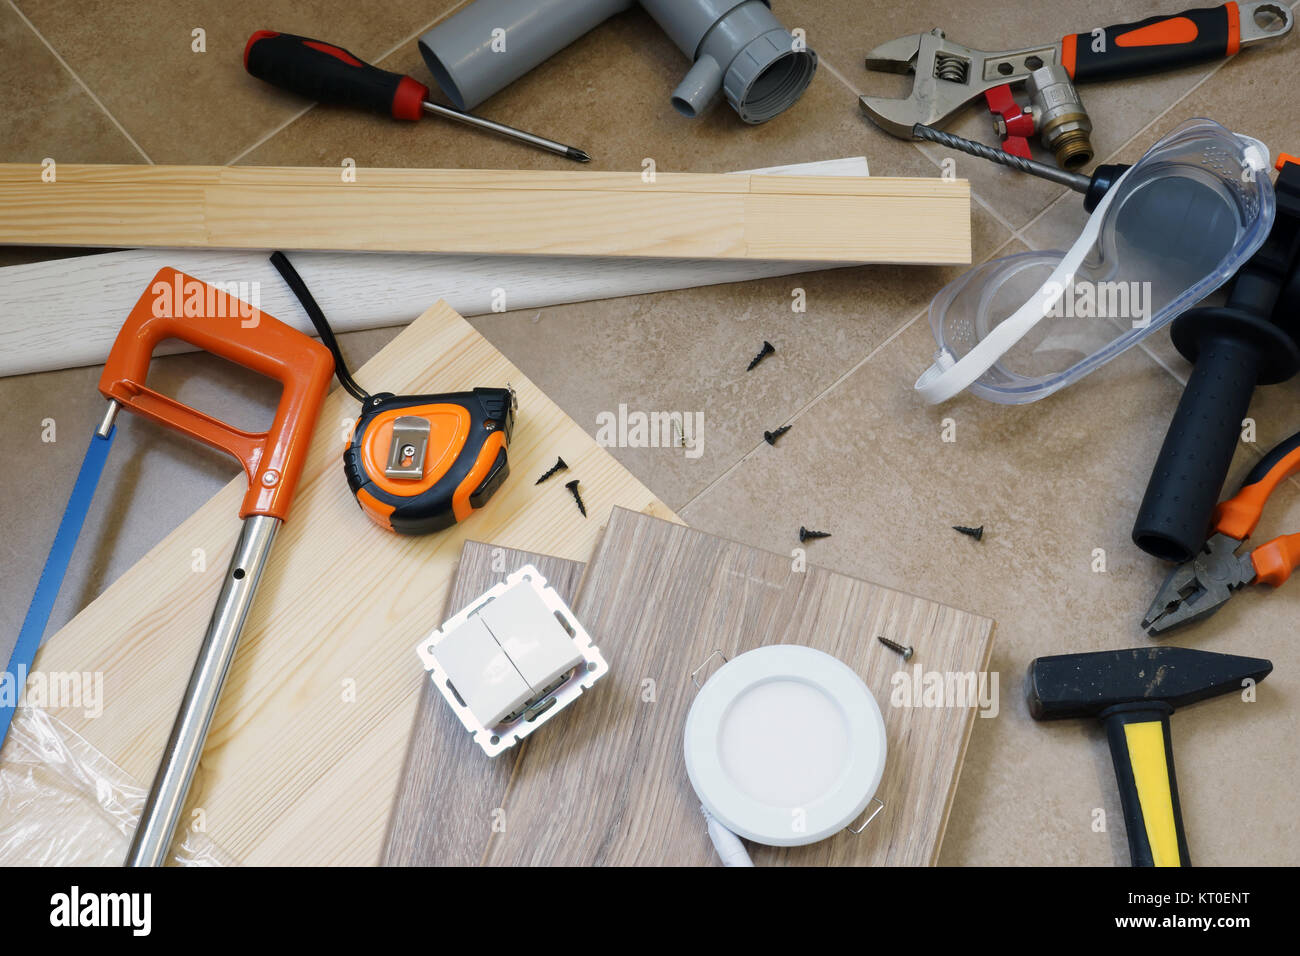 Set of work tools and accessories for home renovation. Stock Photo